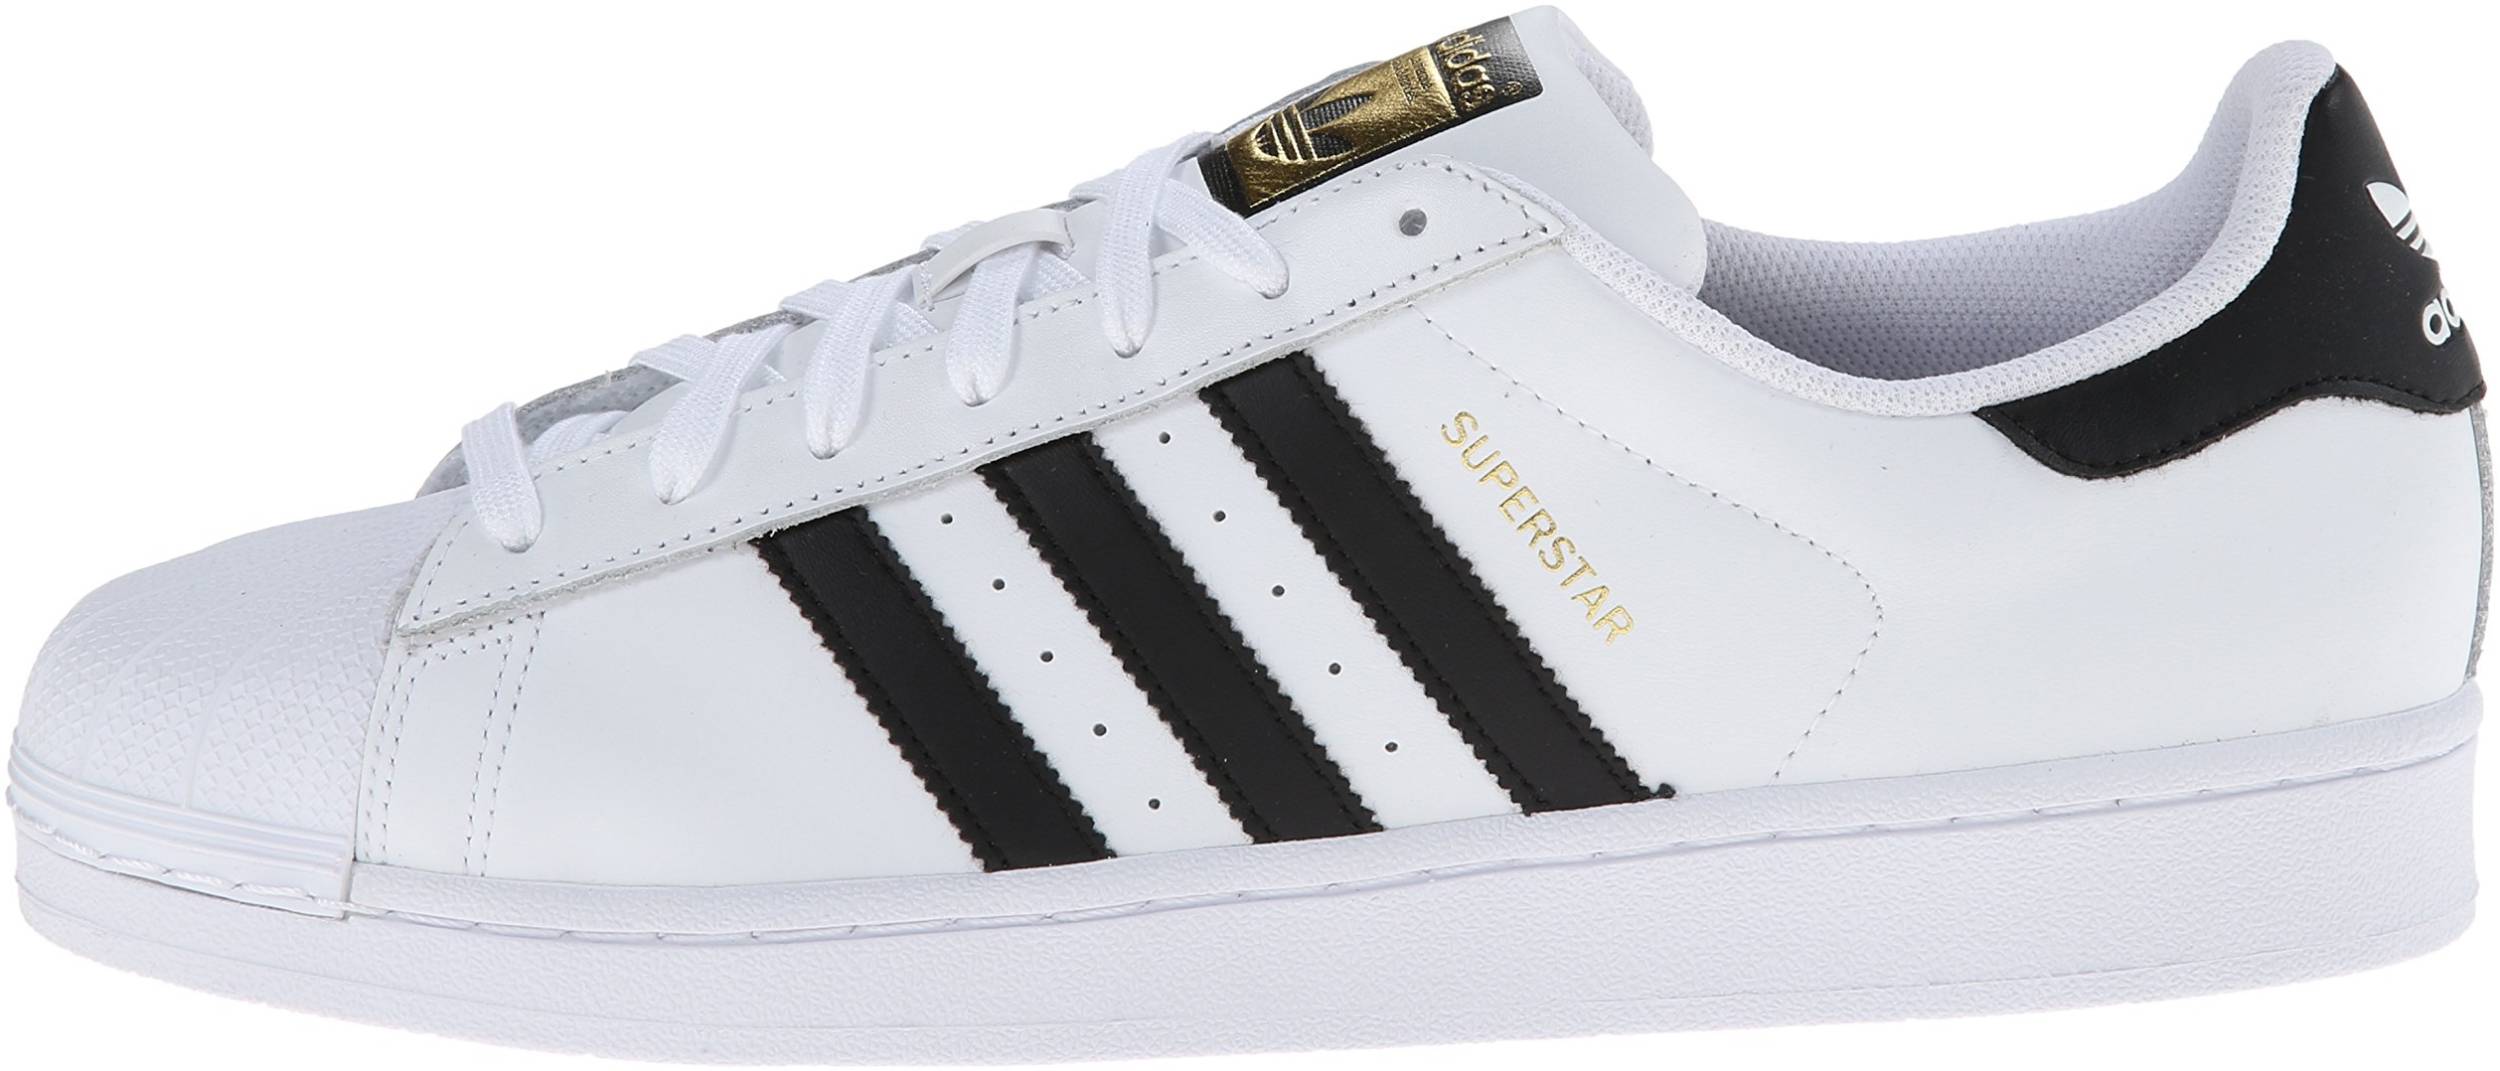 preferable condom Farthest 80+ colors of Adidas Superstar (from $27) | RunRepeat